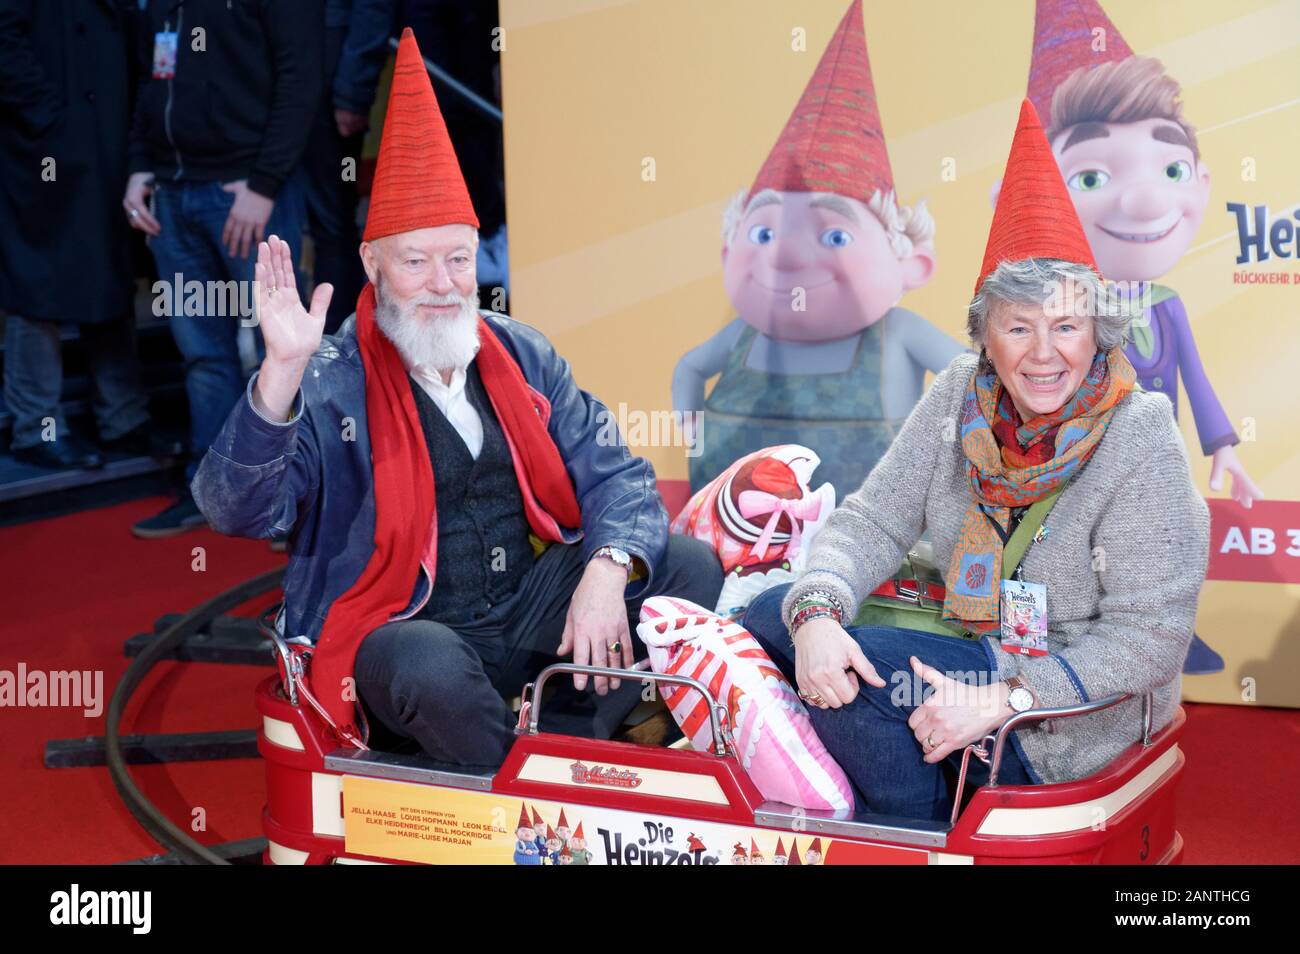 Cologne, Germany. 19th Jan, 2020. The actors Bill Mockridge (l) and Margie Kinsky (r) sit in a children's train before the premiere of the film 'The Heinzels - Return of the Brown Men'. The animated film will start in the cinemas on 30.01.2020. Credit: Henning Kaiser/dpa/Alamy Live News Stock Photo